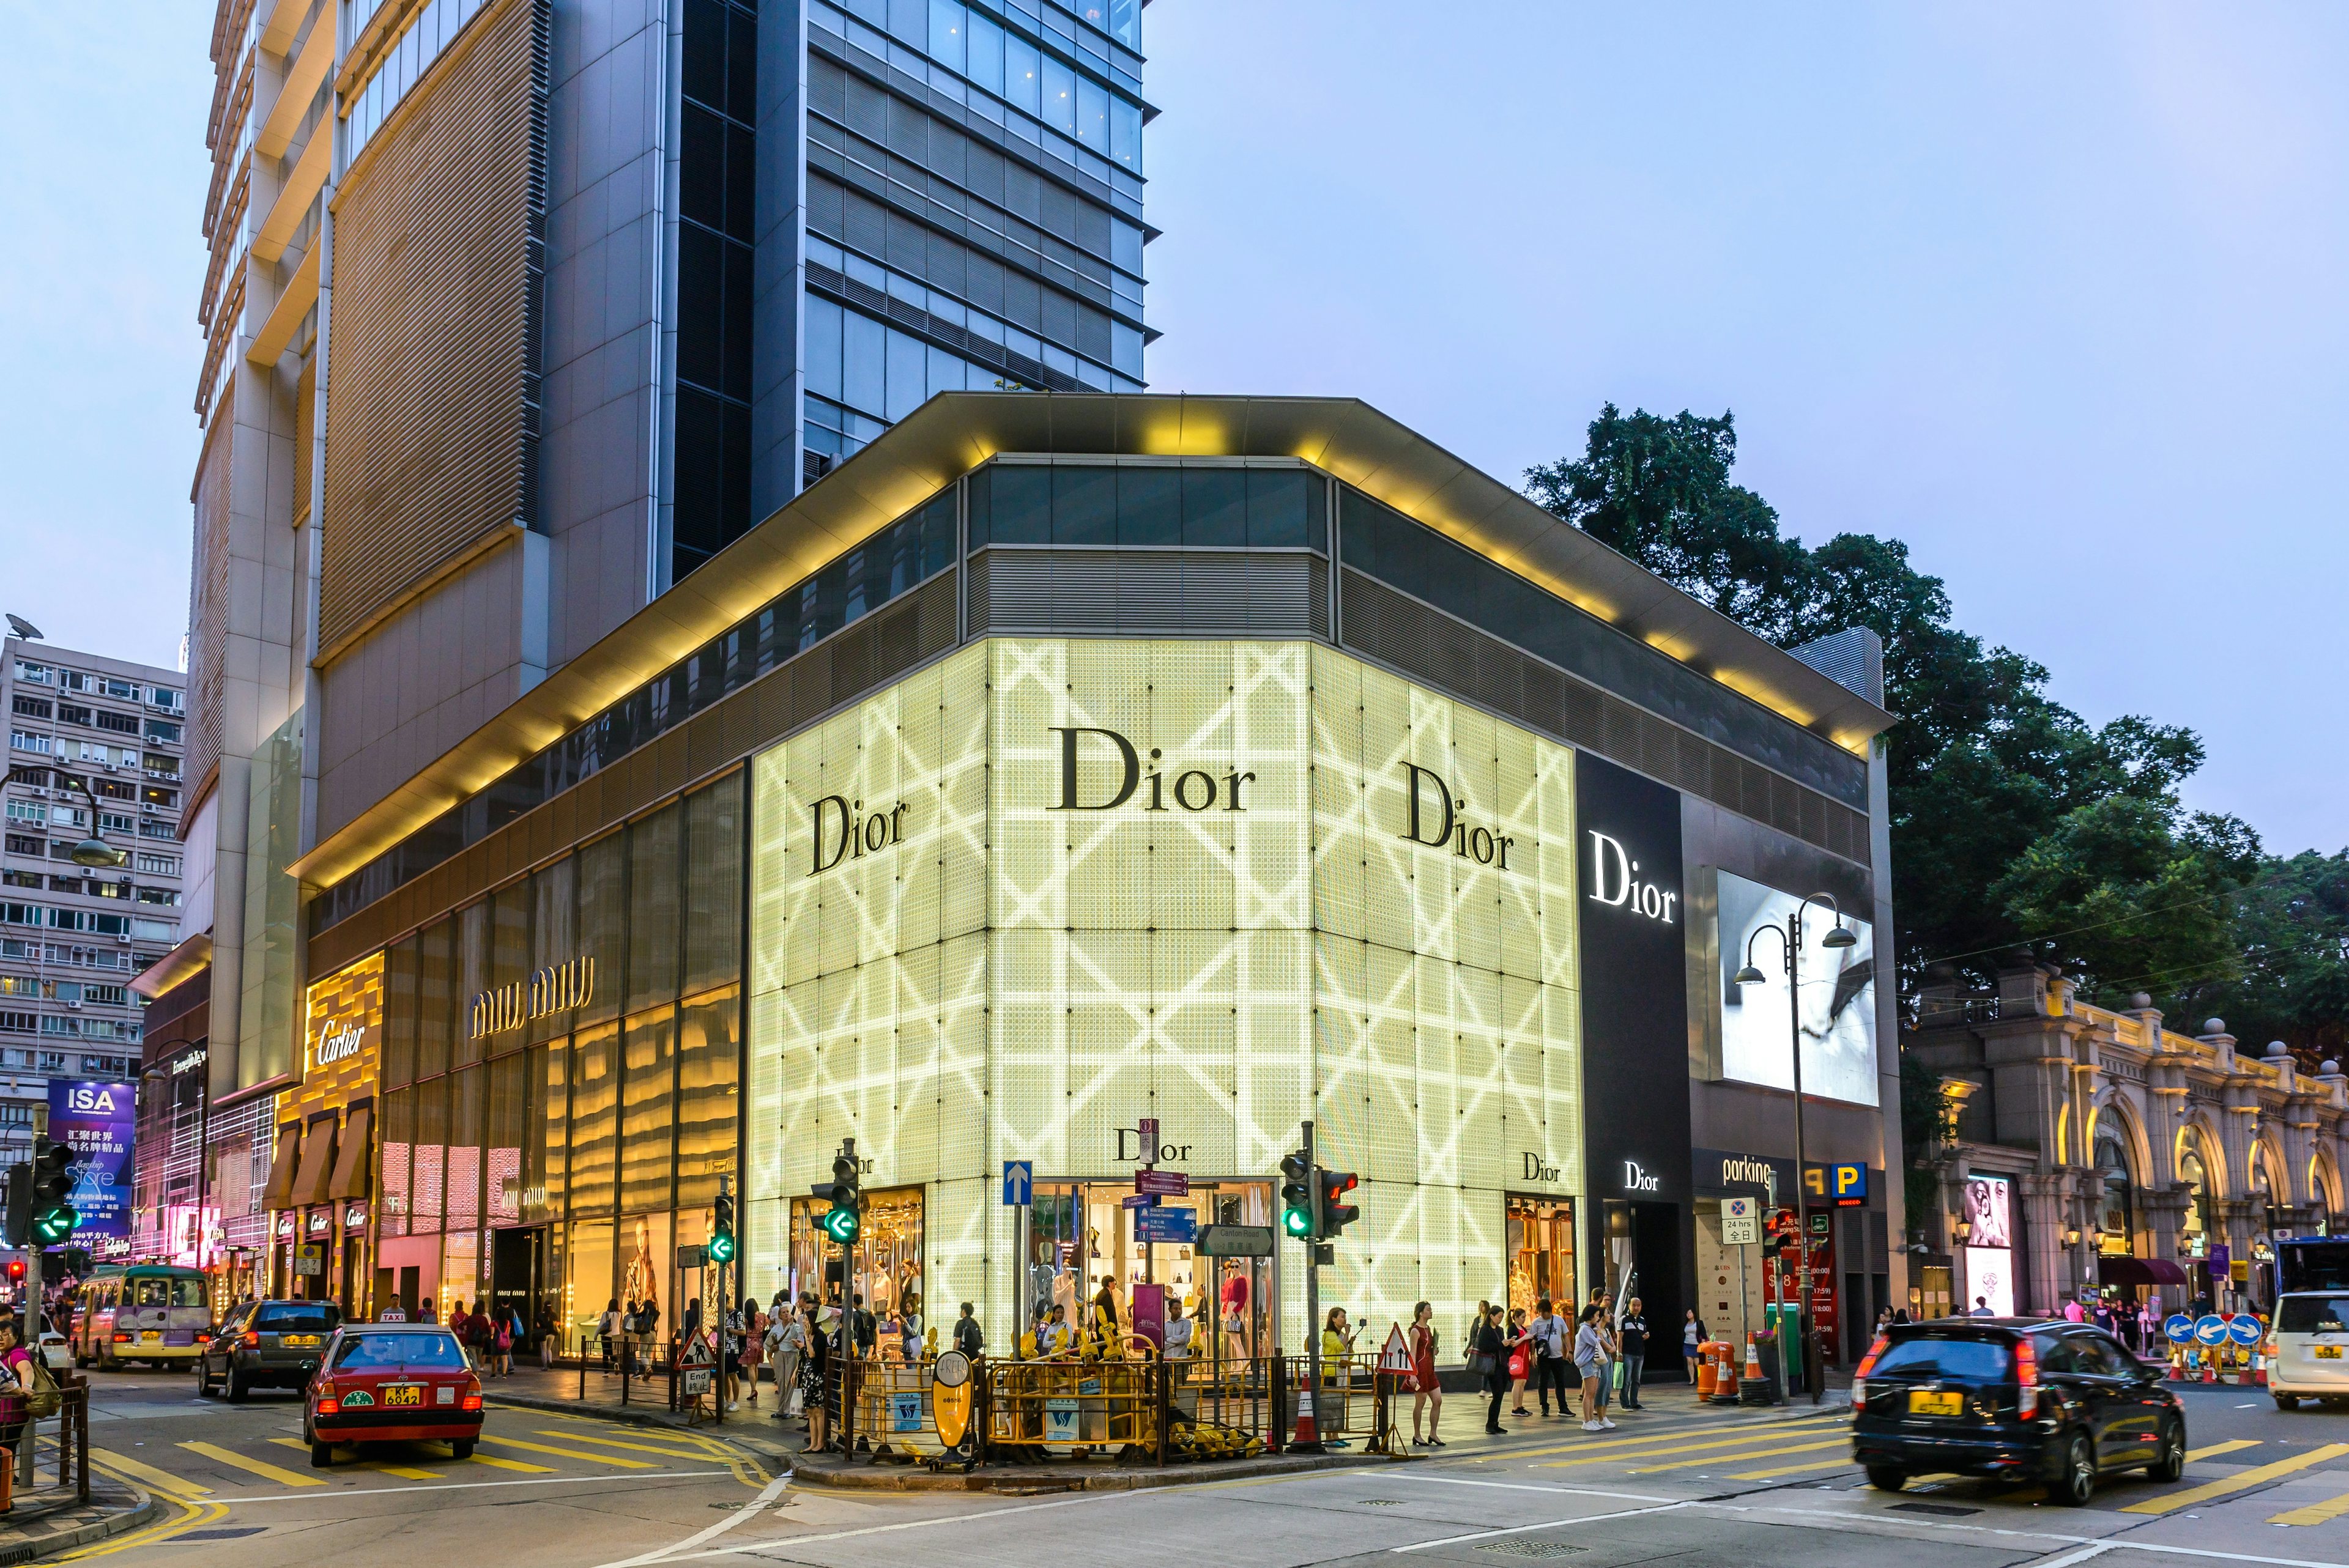 Dior's decision to snub Hong Kong comes a month before its show was due to take place. Photo: Shutterstock